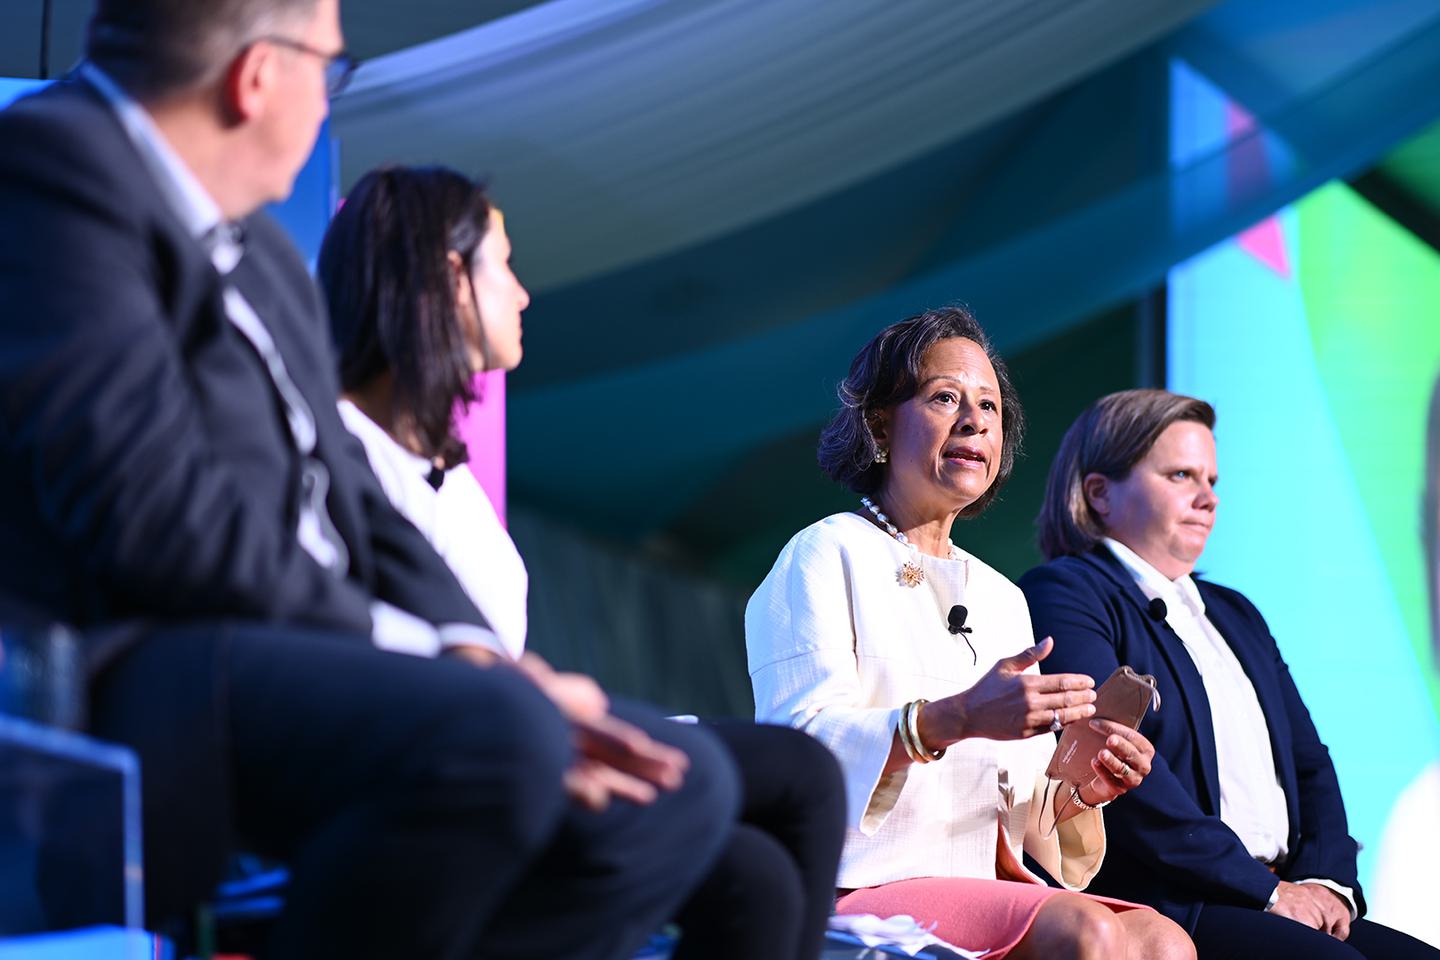 President Paula A. Johnson on stage at the Aspen Institute’s conference Aspen Ideas: Health.